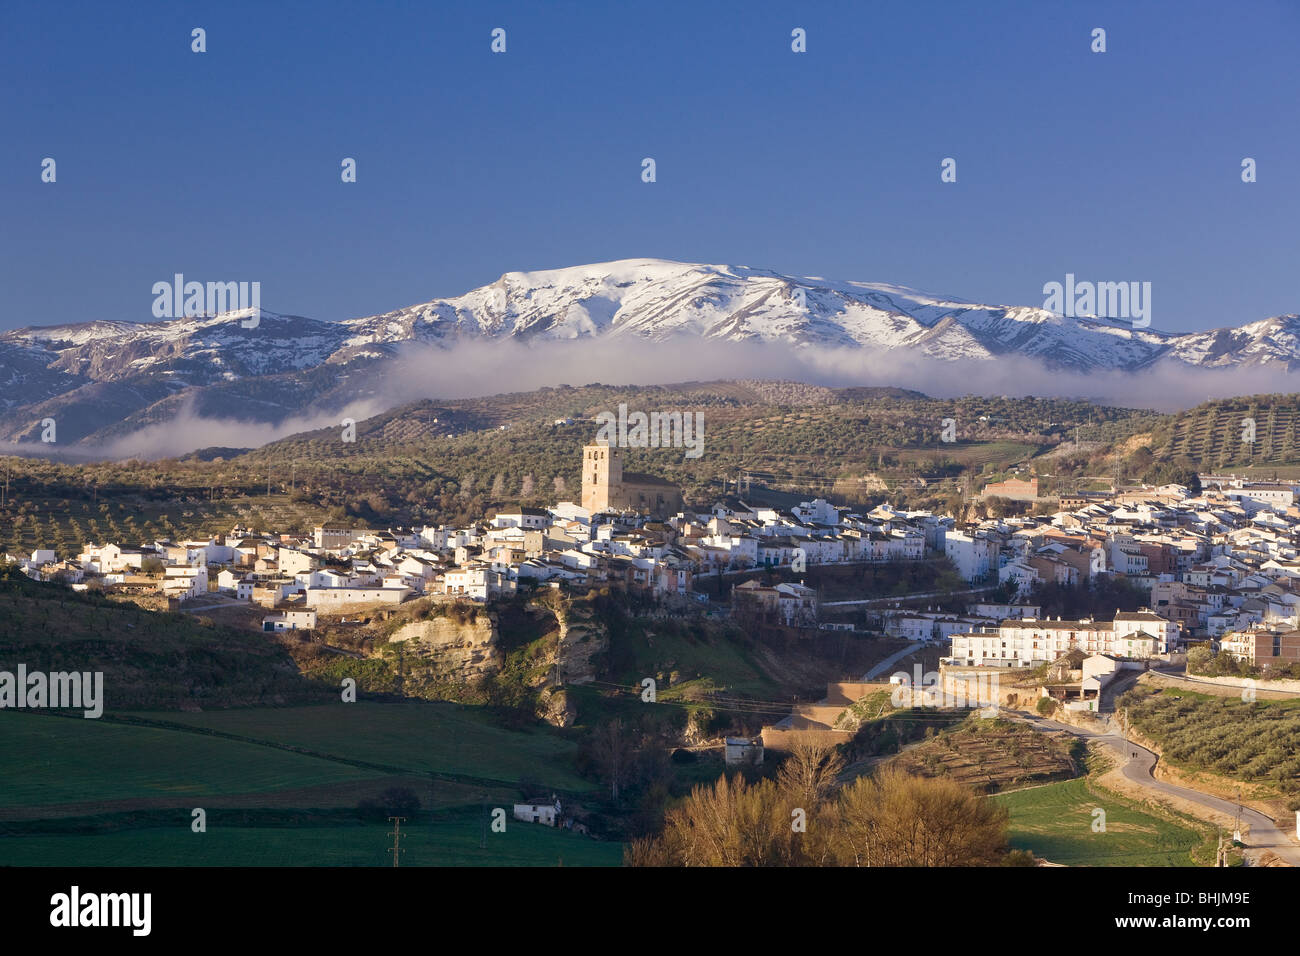 Alhama de Granada with snow covered mountains in distance, Granada, Spain Stock Photo